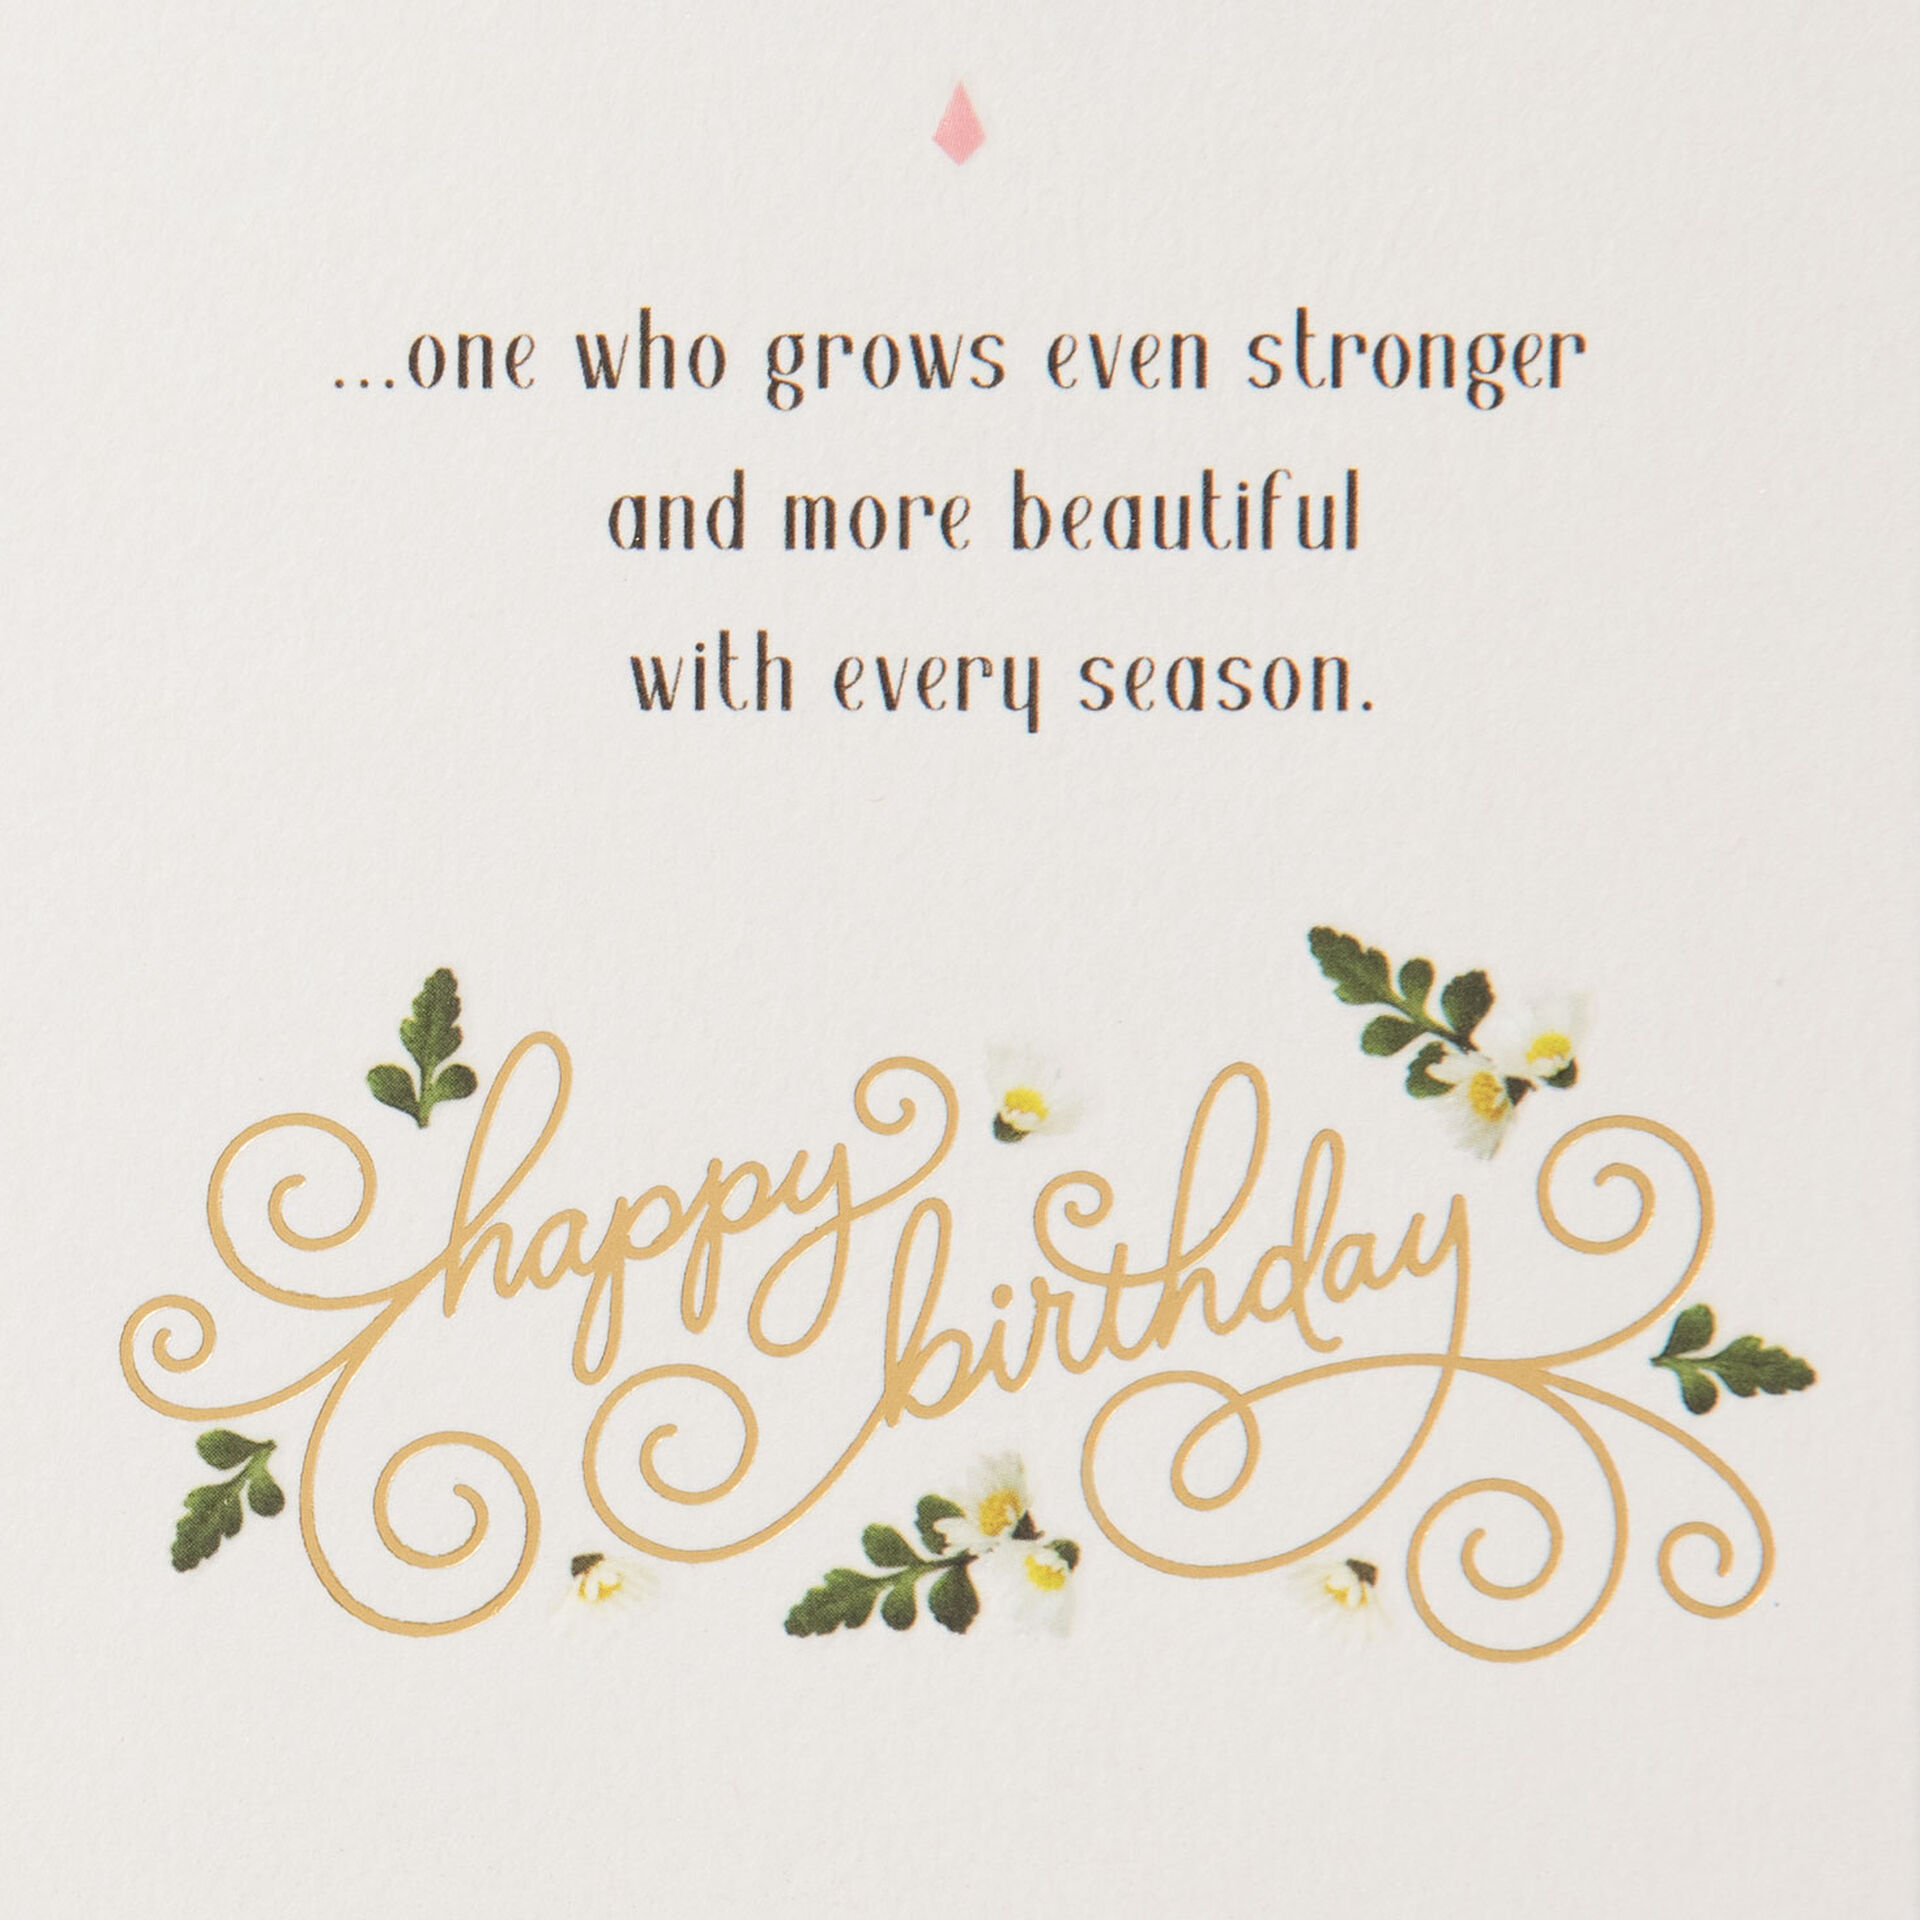 Woman-With-Flowers-in-Her-Hair-Birthday-Card_399HBD3805_02